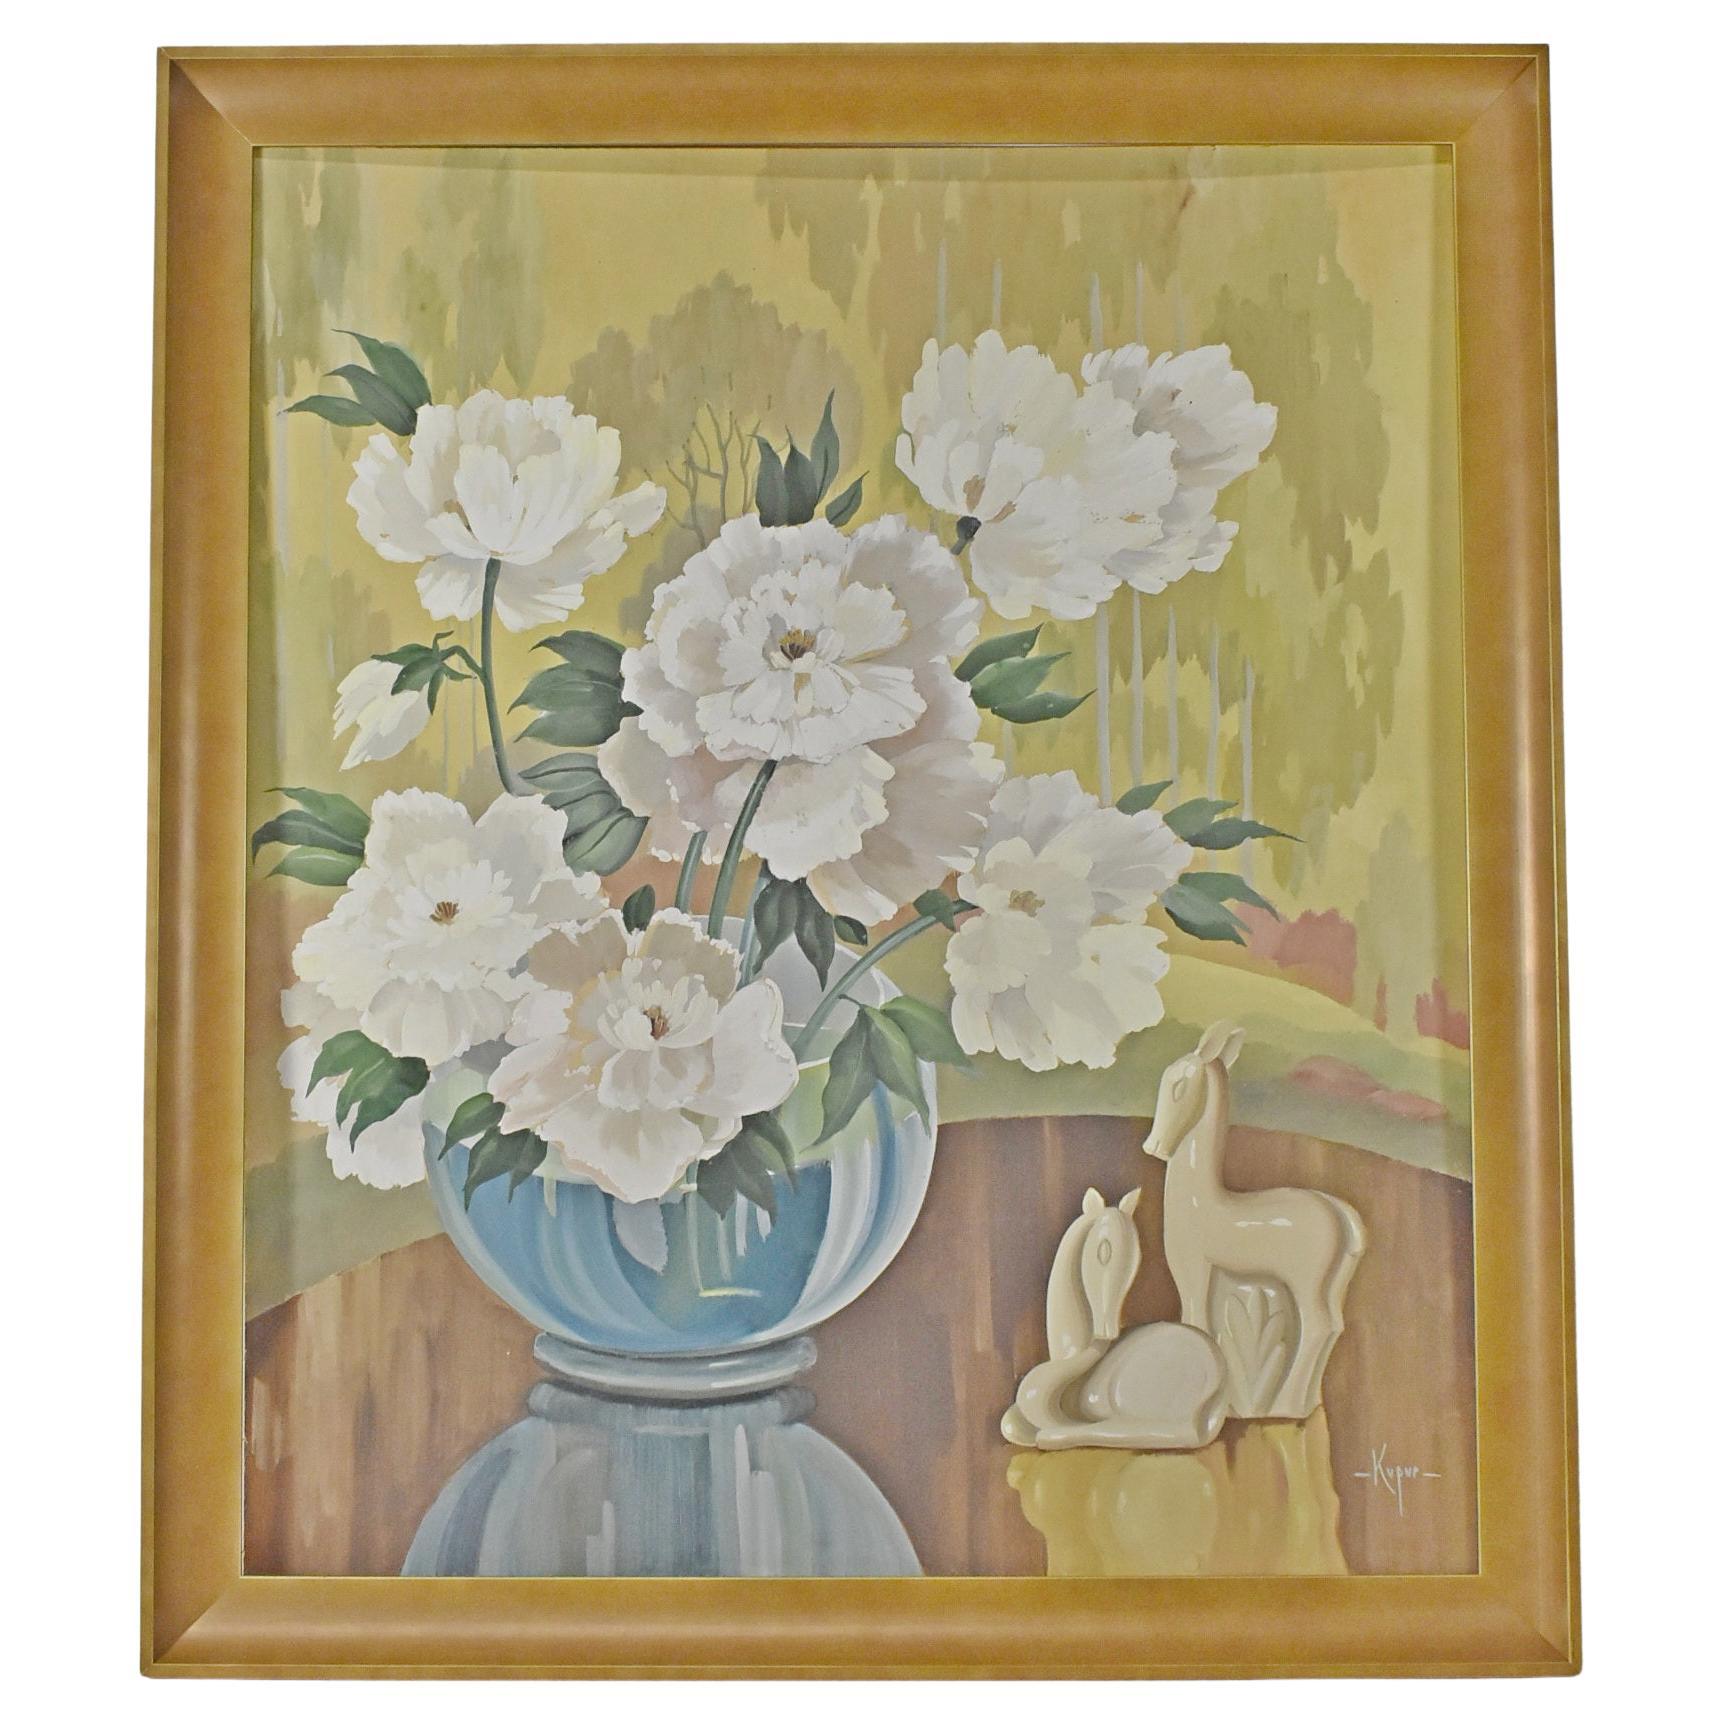 Art Deco Era Still Life by Kupur of White Peonies and Gazelles For Sale